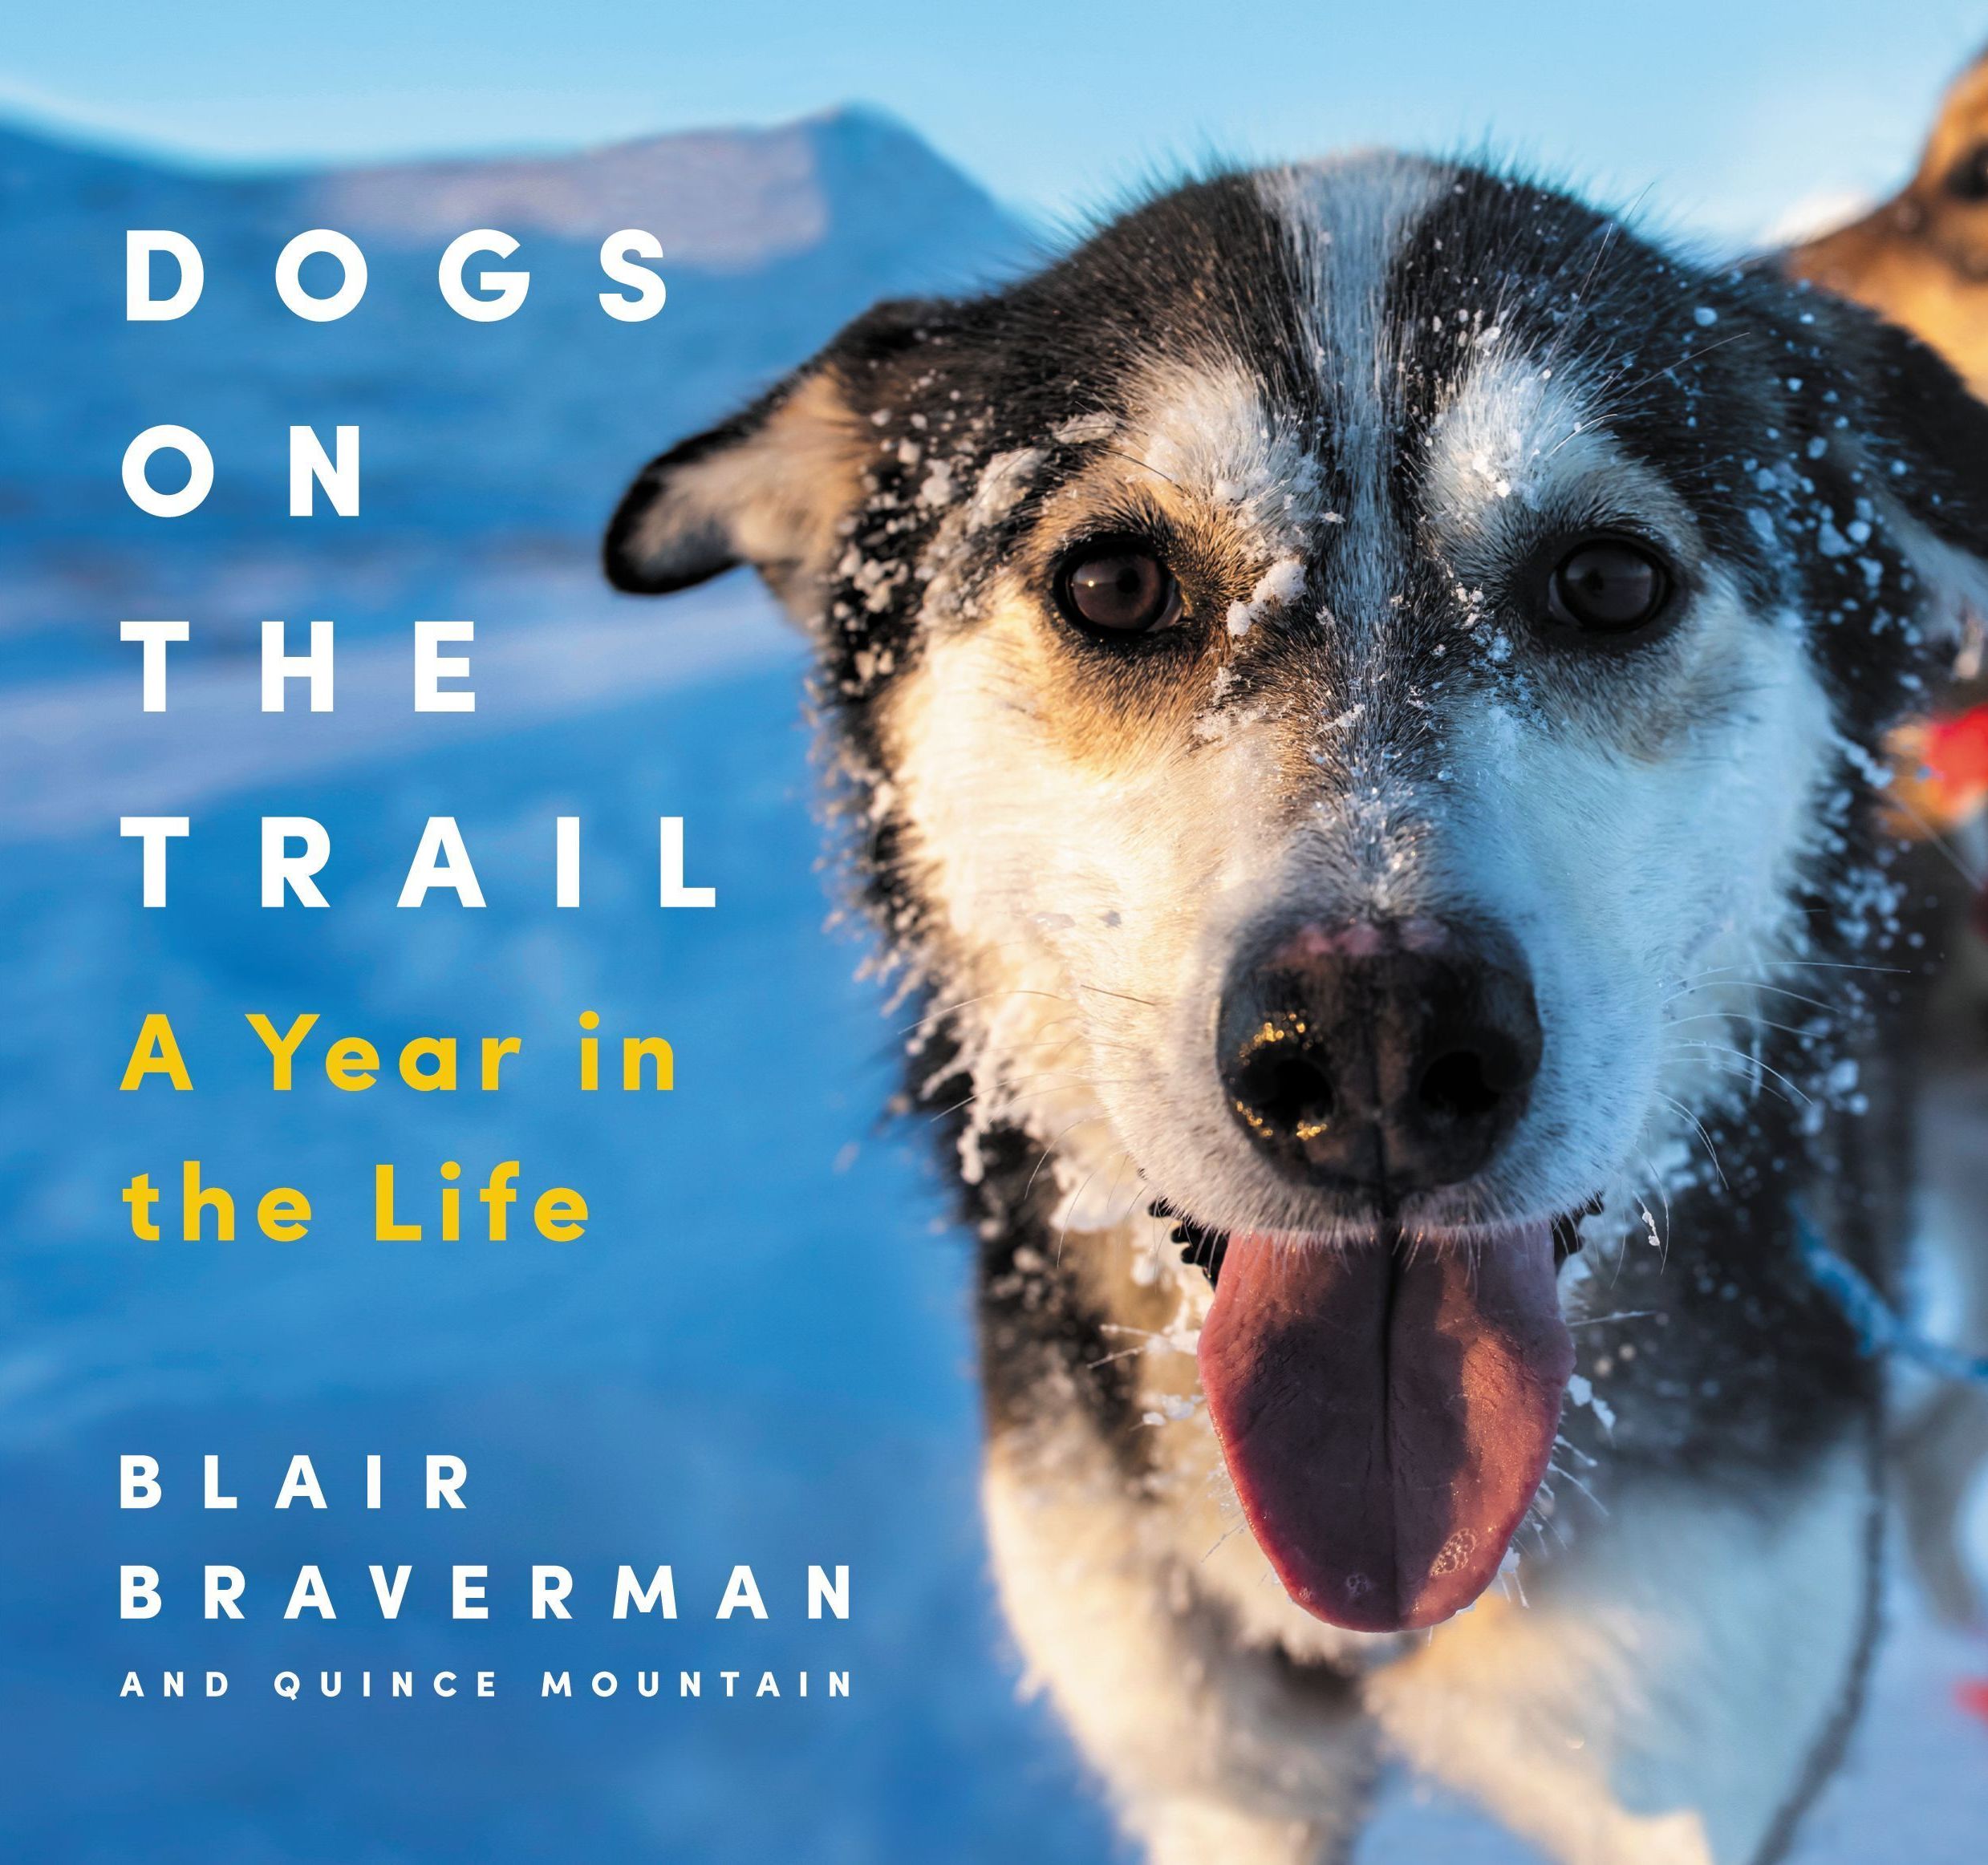 The cover of a book that says "Dogs on the trail: A year in the life"